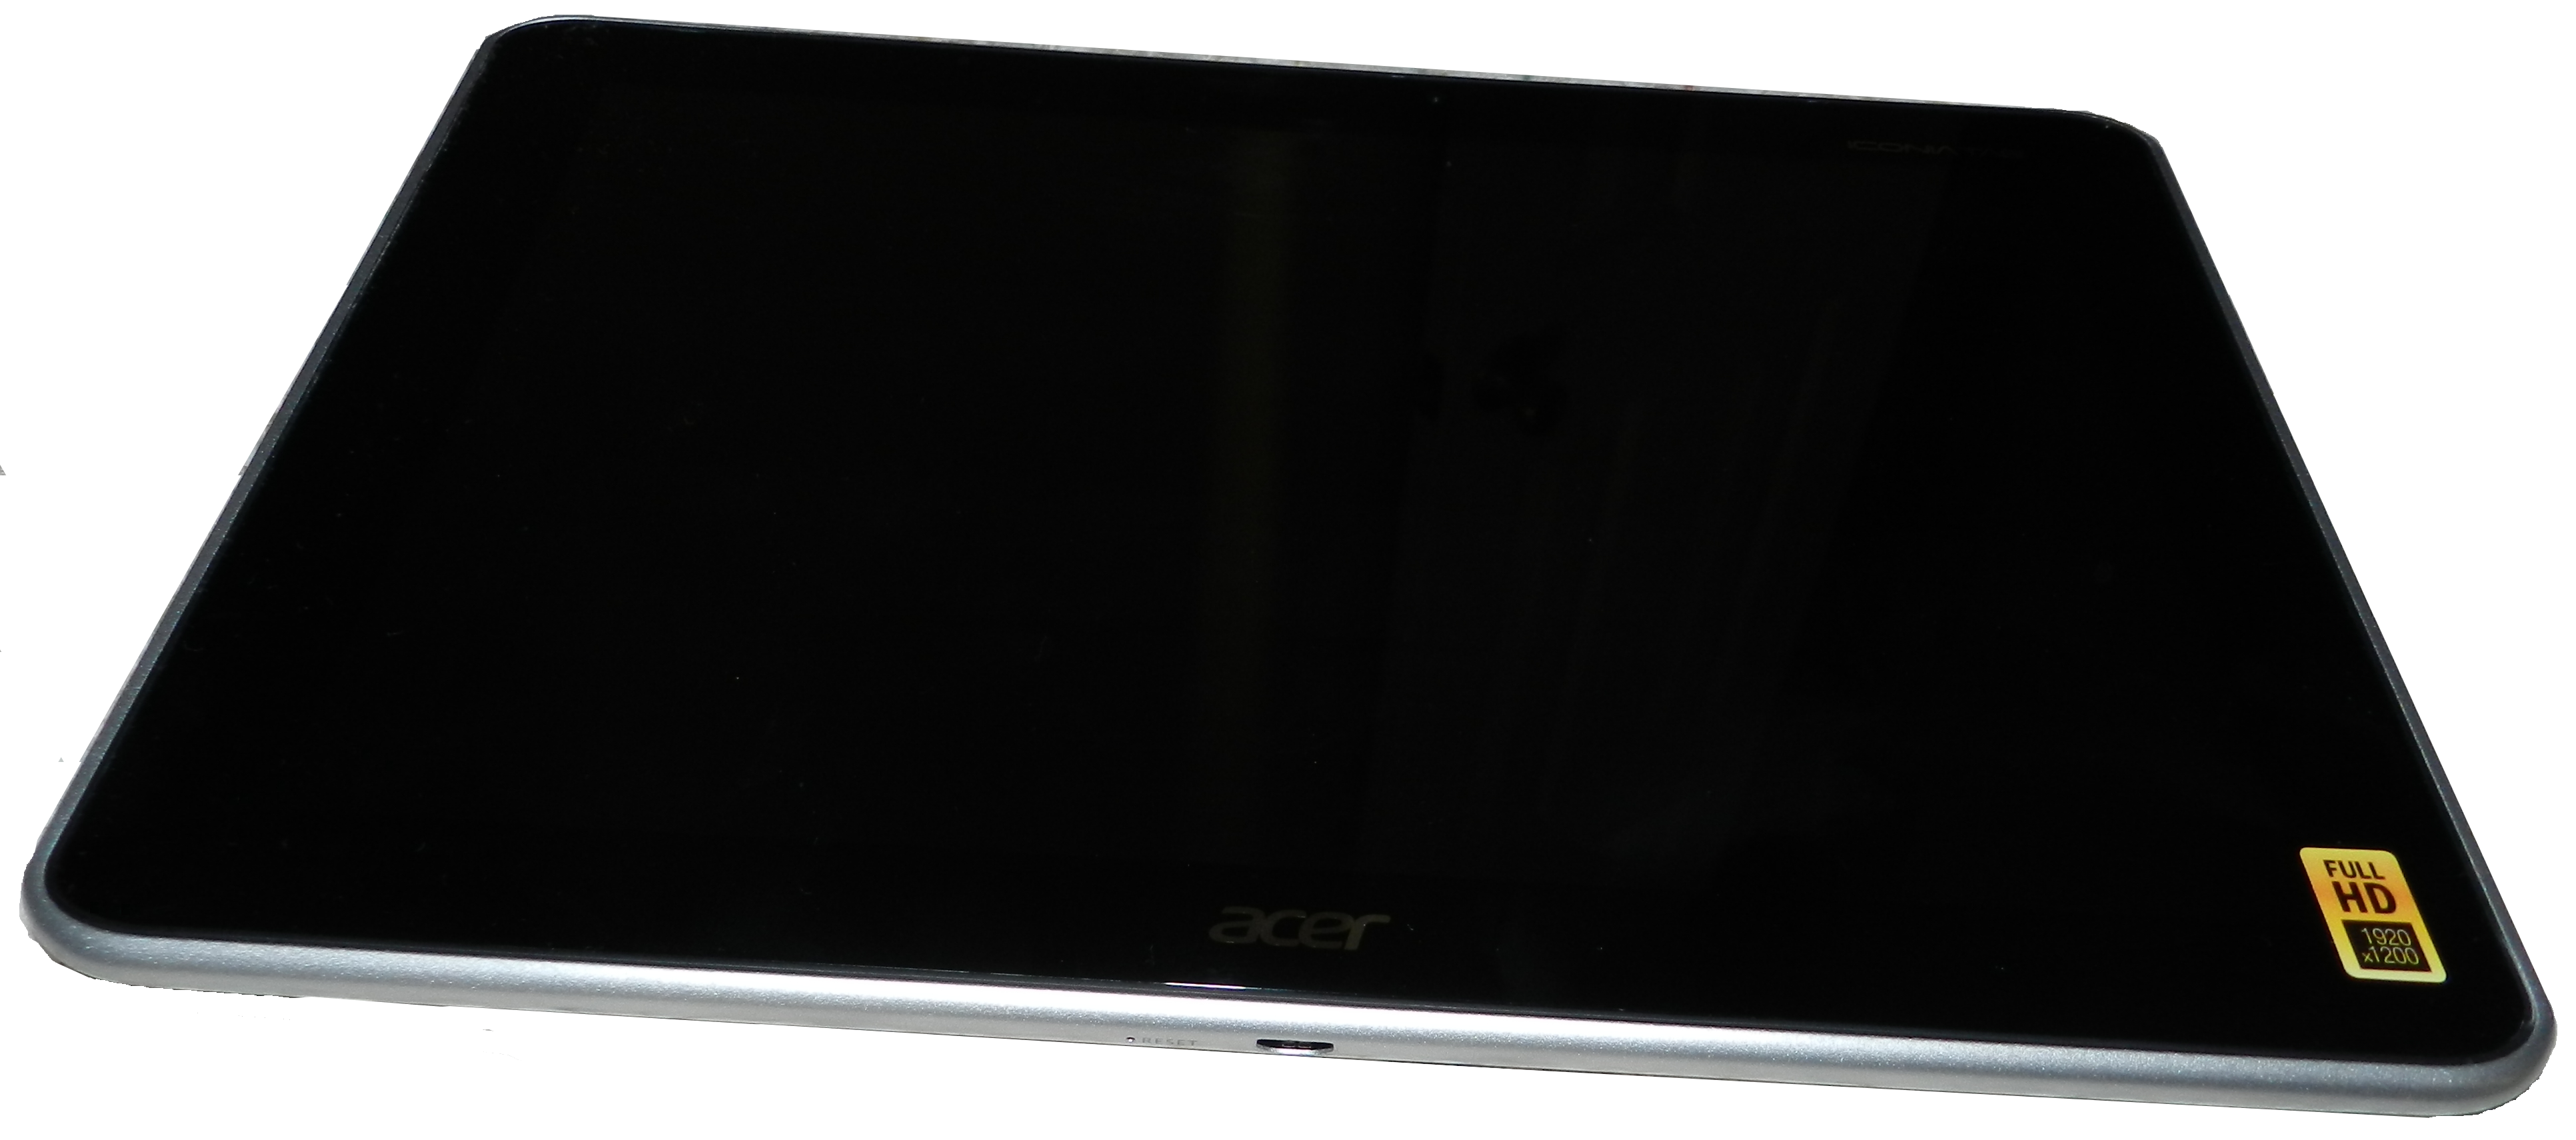 File:Acer Iconia Tab A700 fro